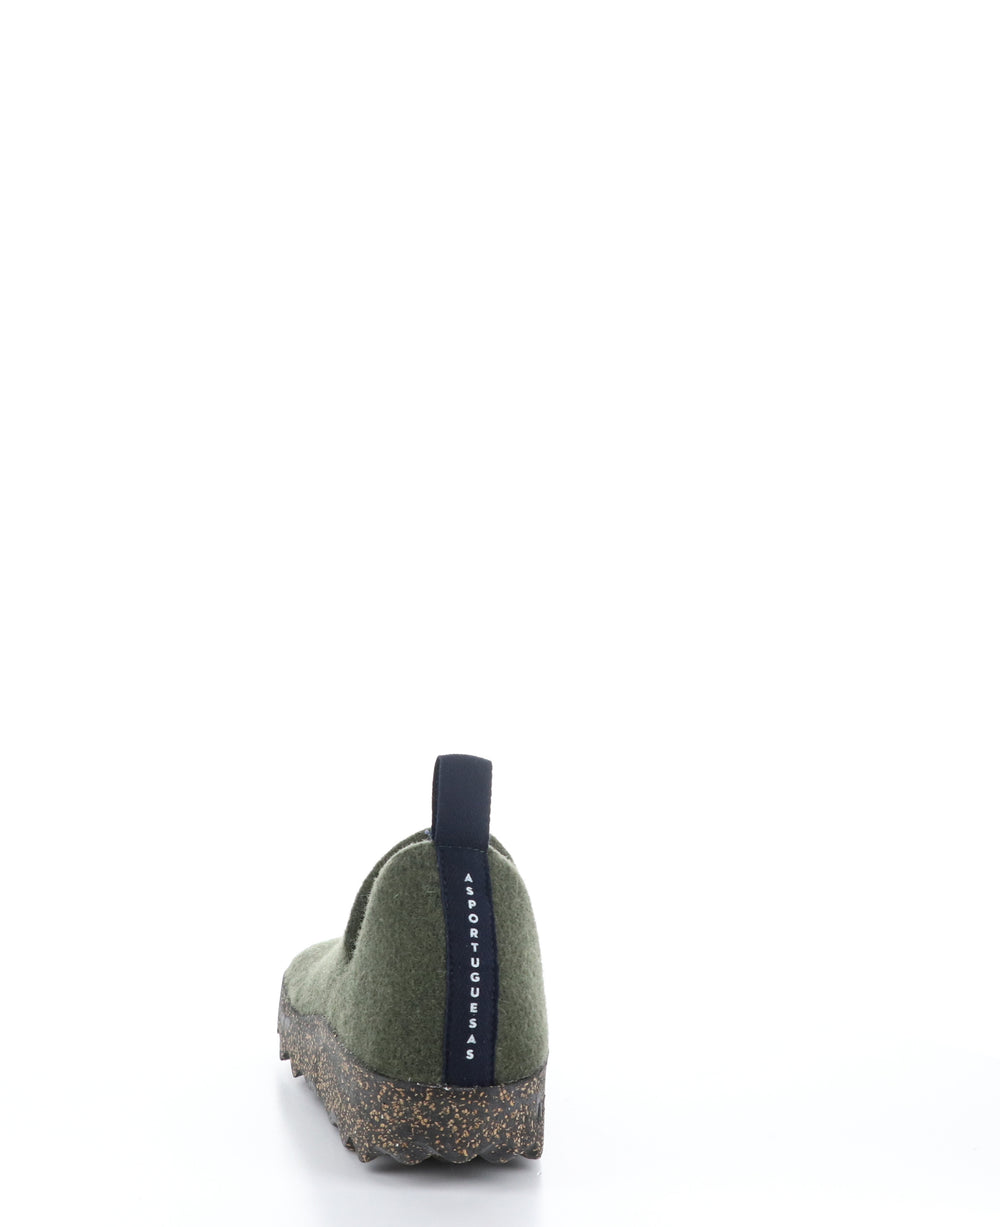 CITYM Military Green Round Toe Shoes|CITYM Chaussures à Bout Rond in Vert